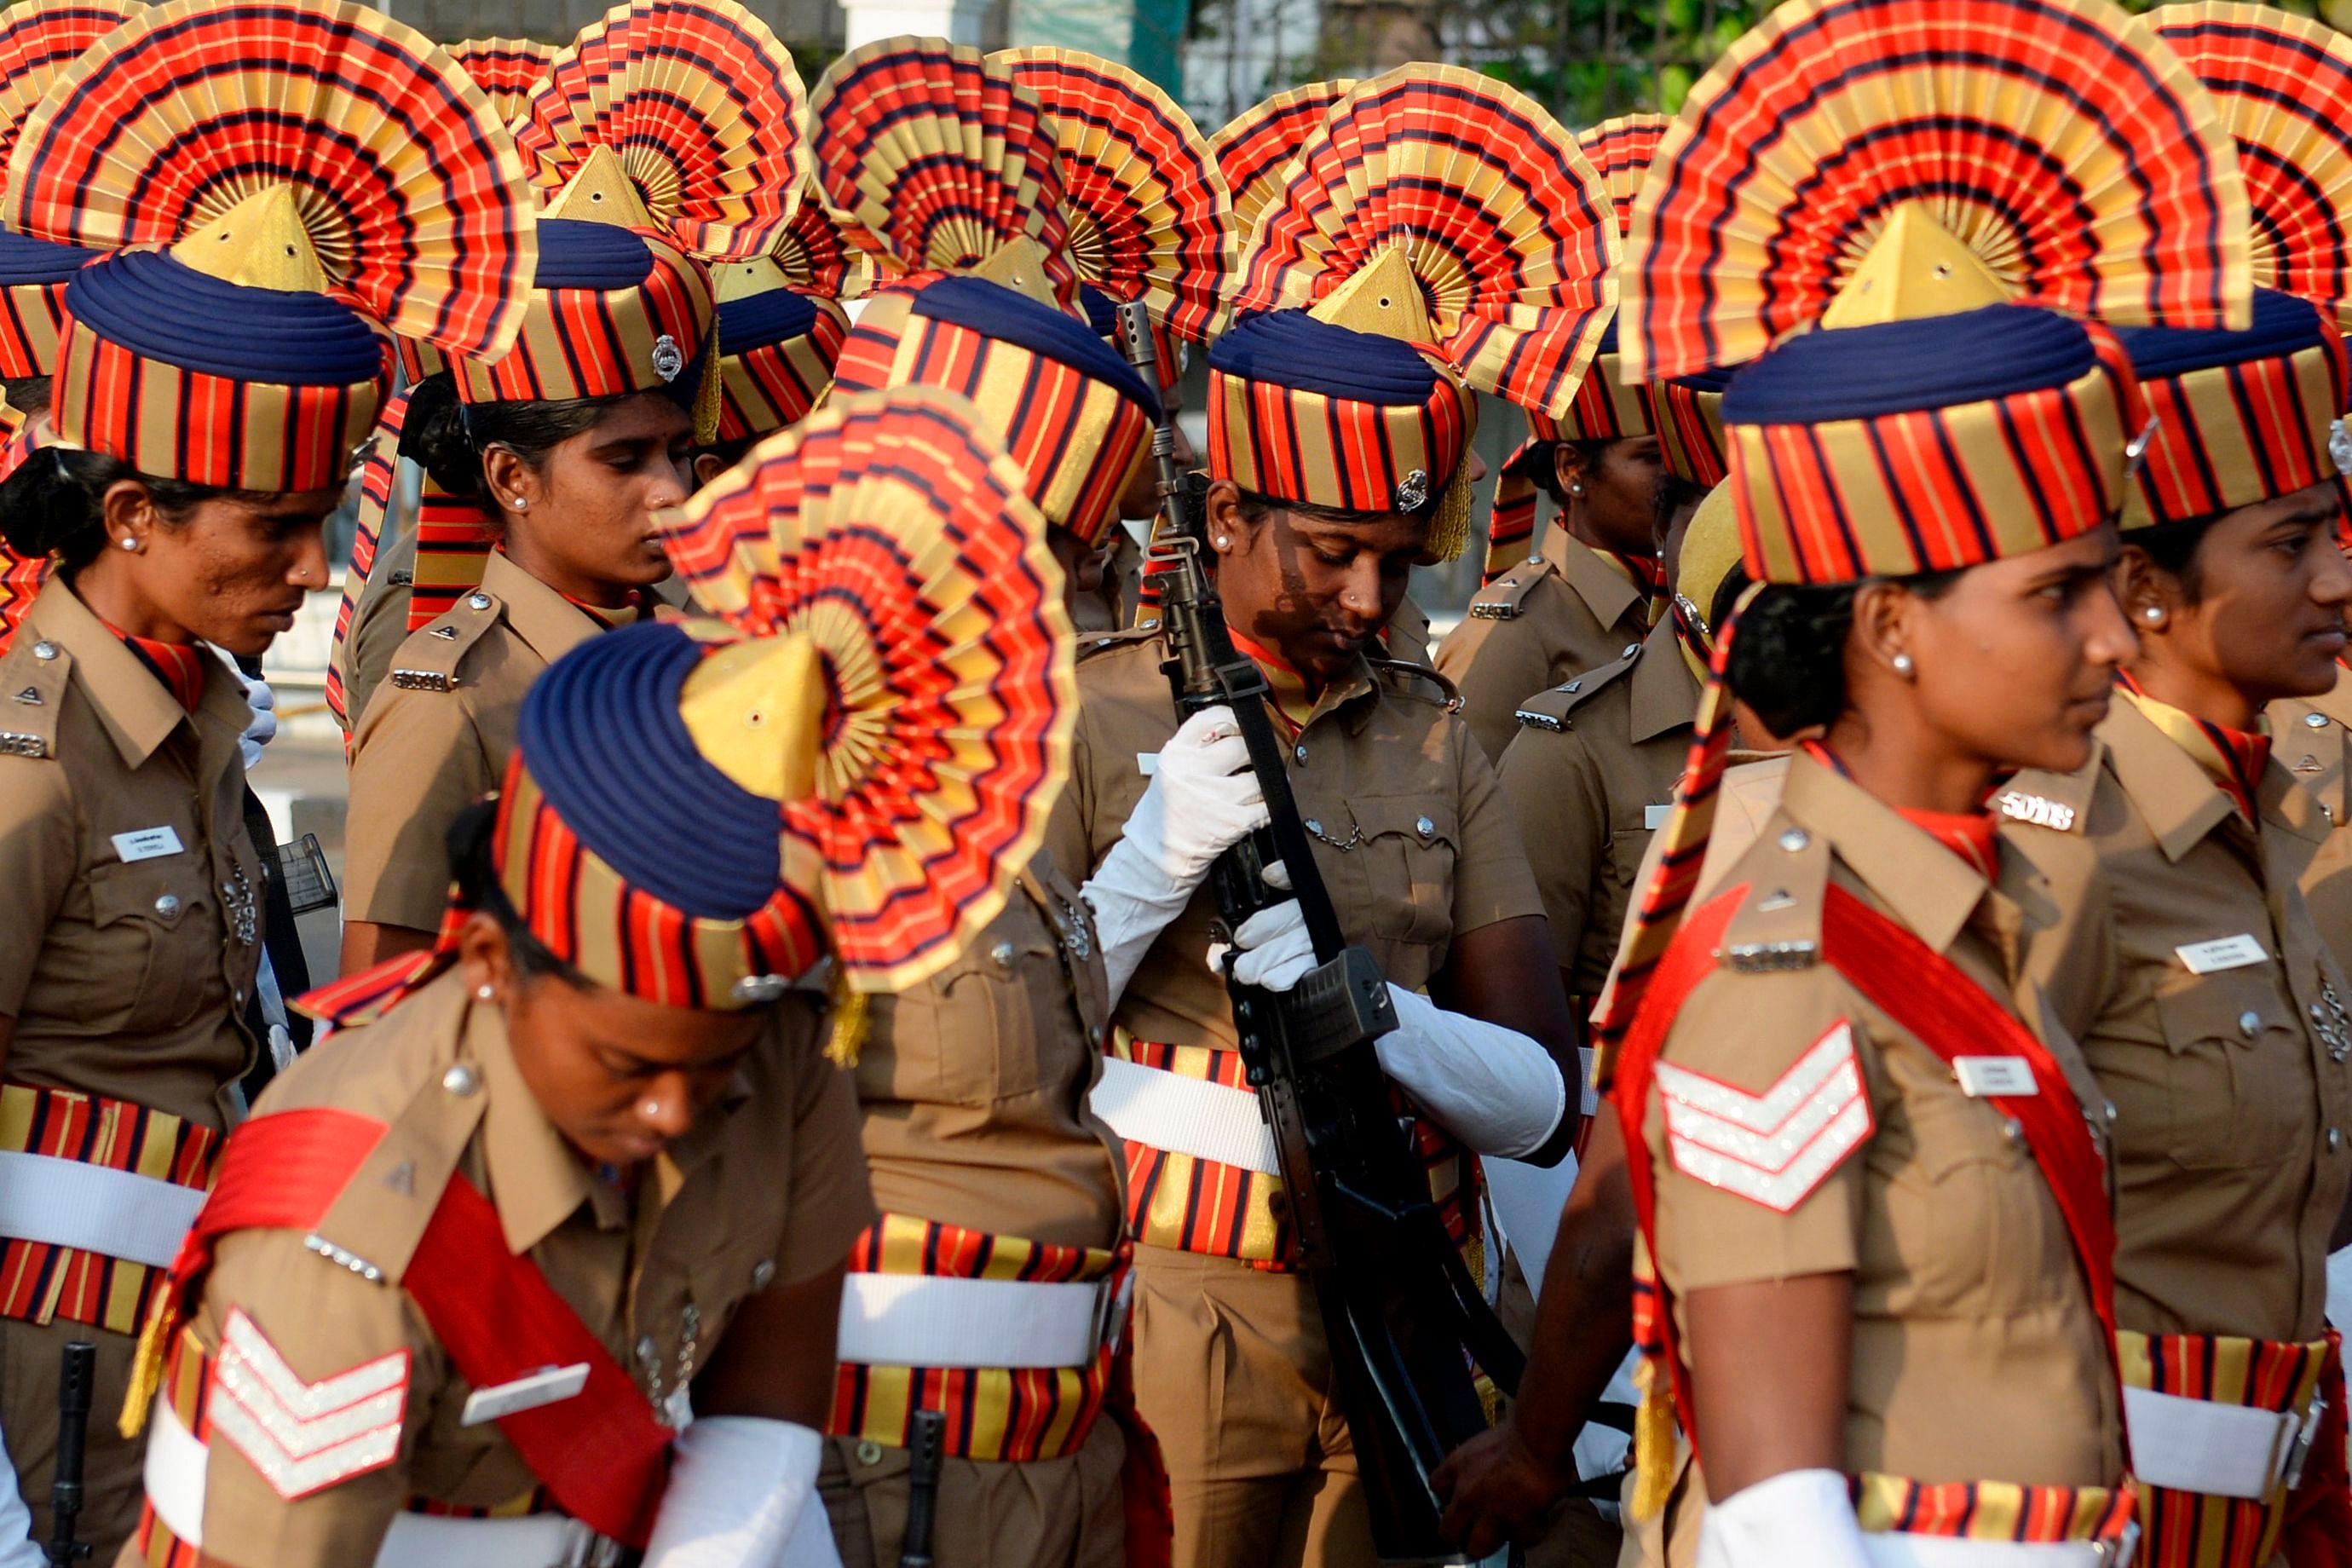 Women cadets of Tamilnadu Police Battalion prepare for a full dress rehearsal for the upcoming Indian Republic Day parade. (AFP Photo)